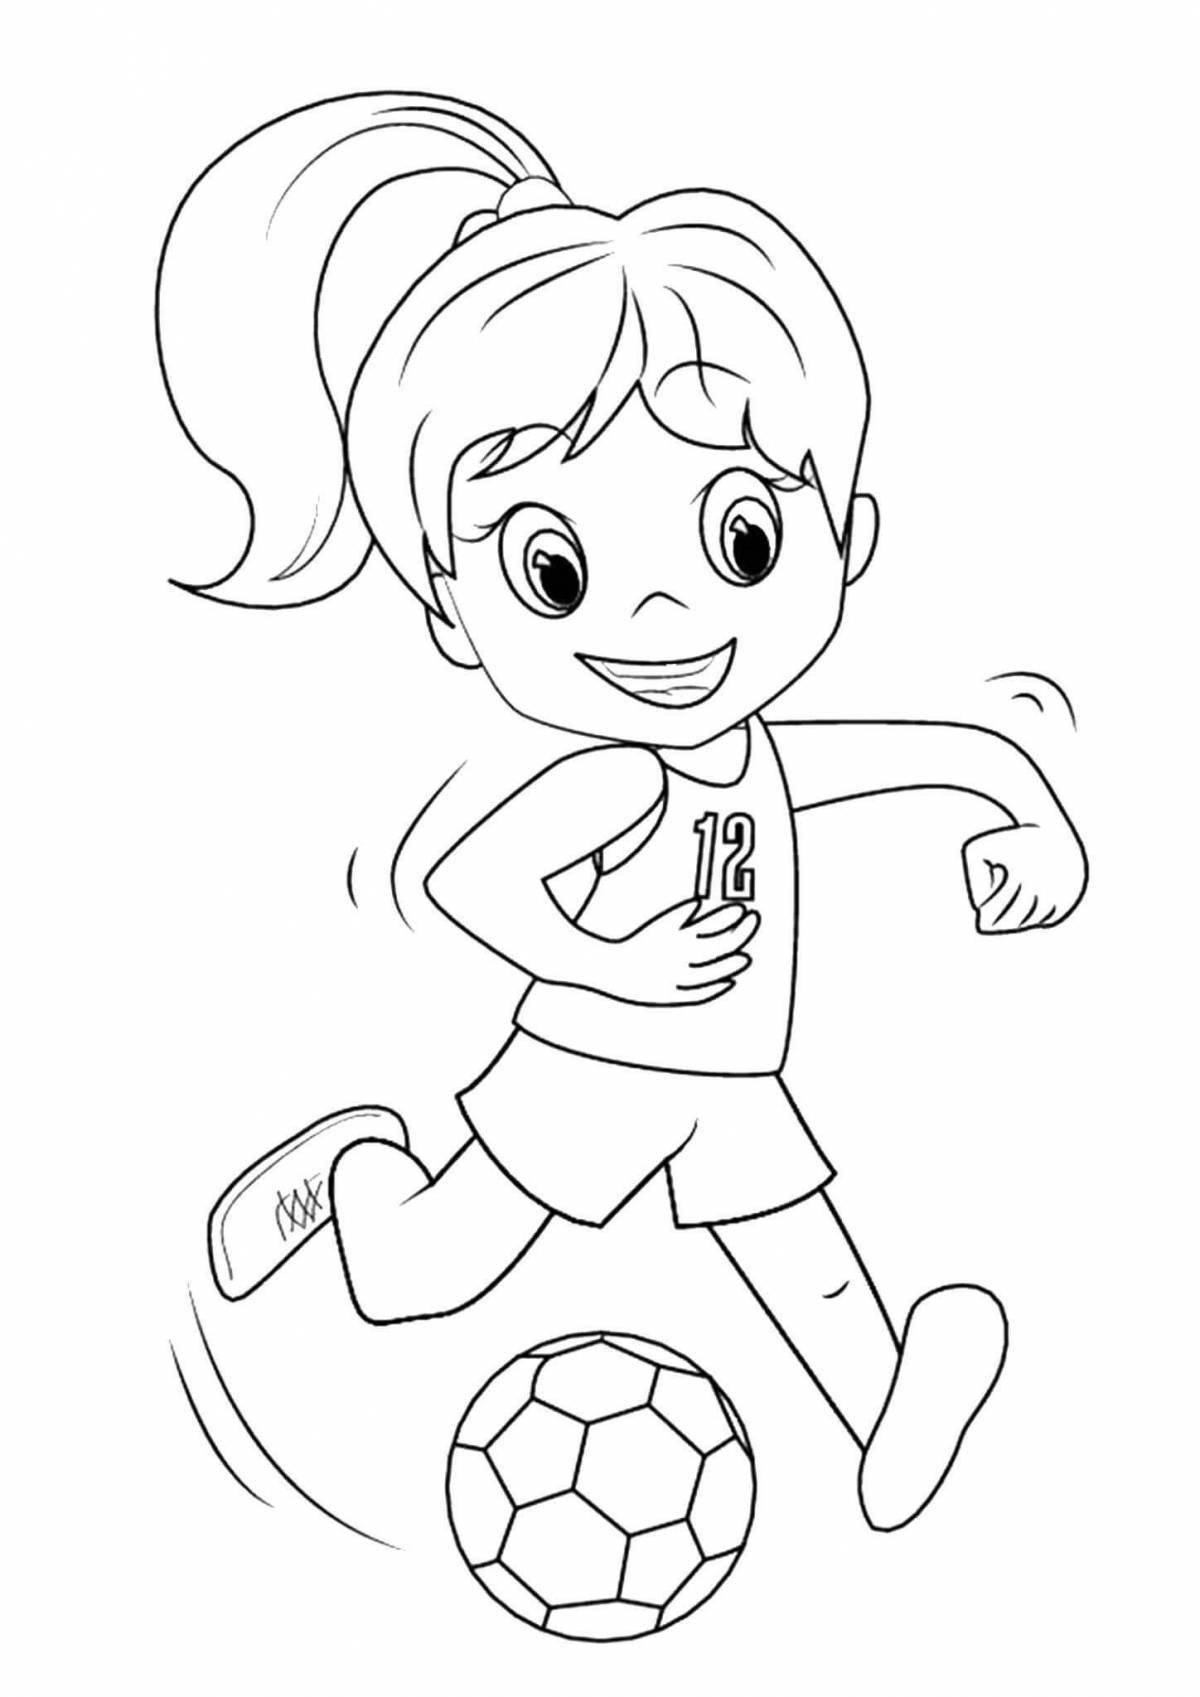 Coloring page of sports games